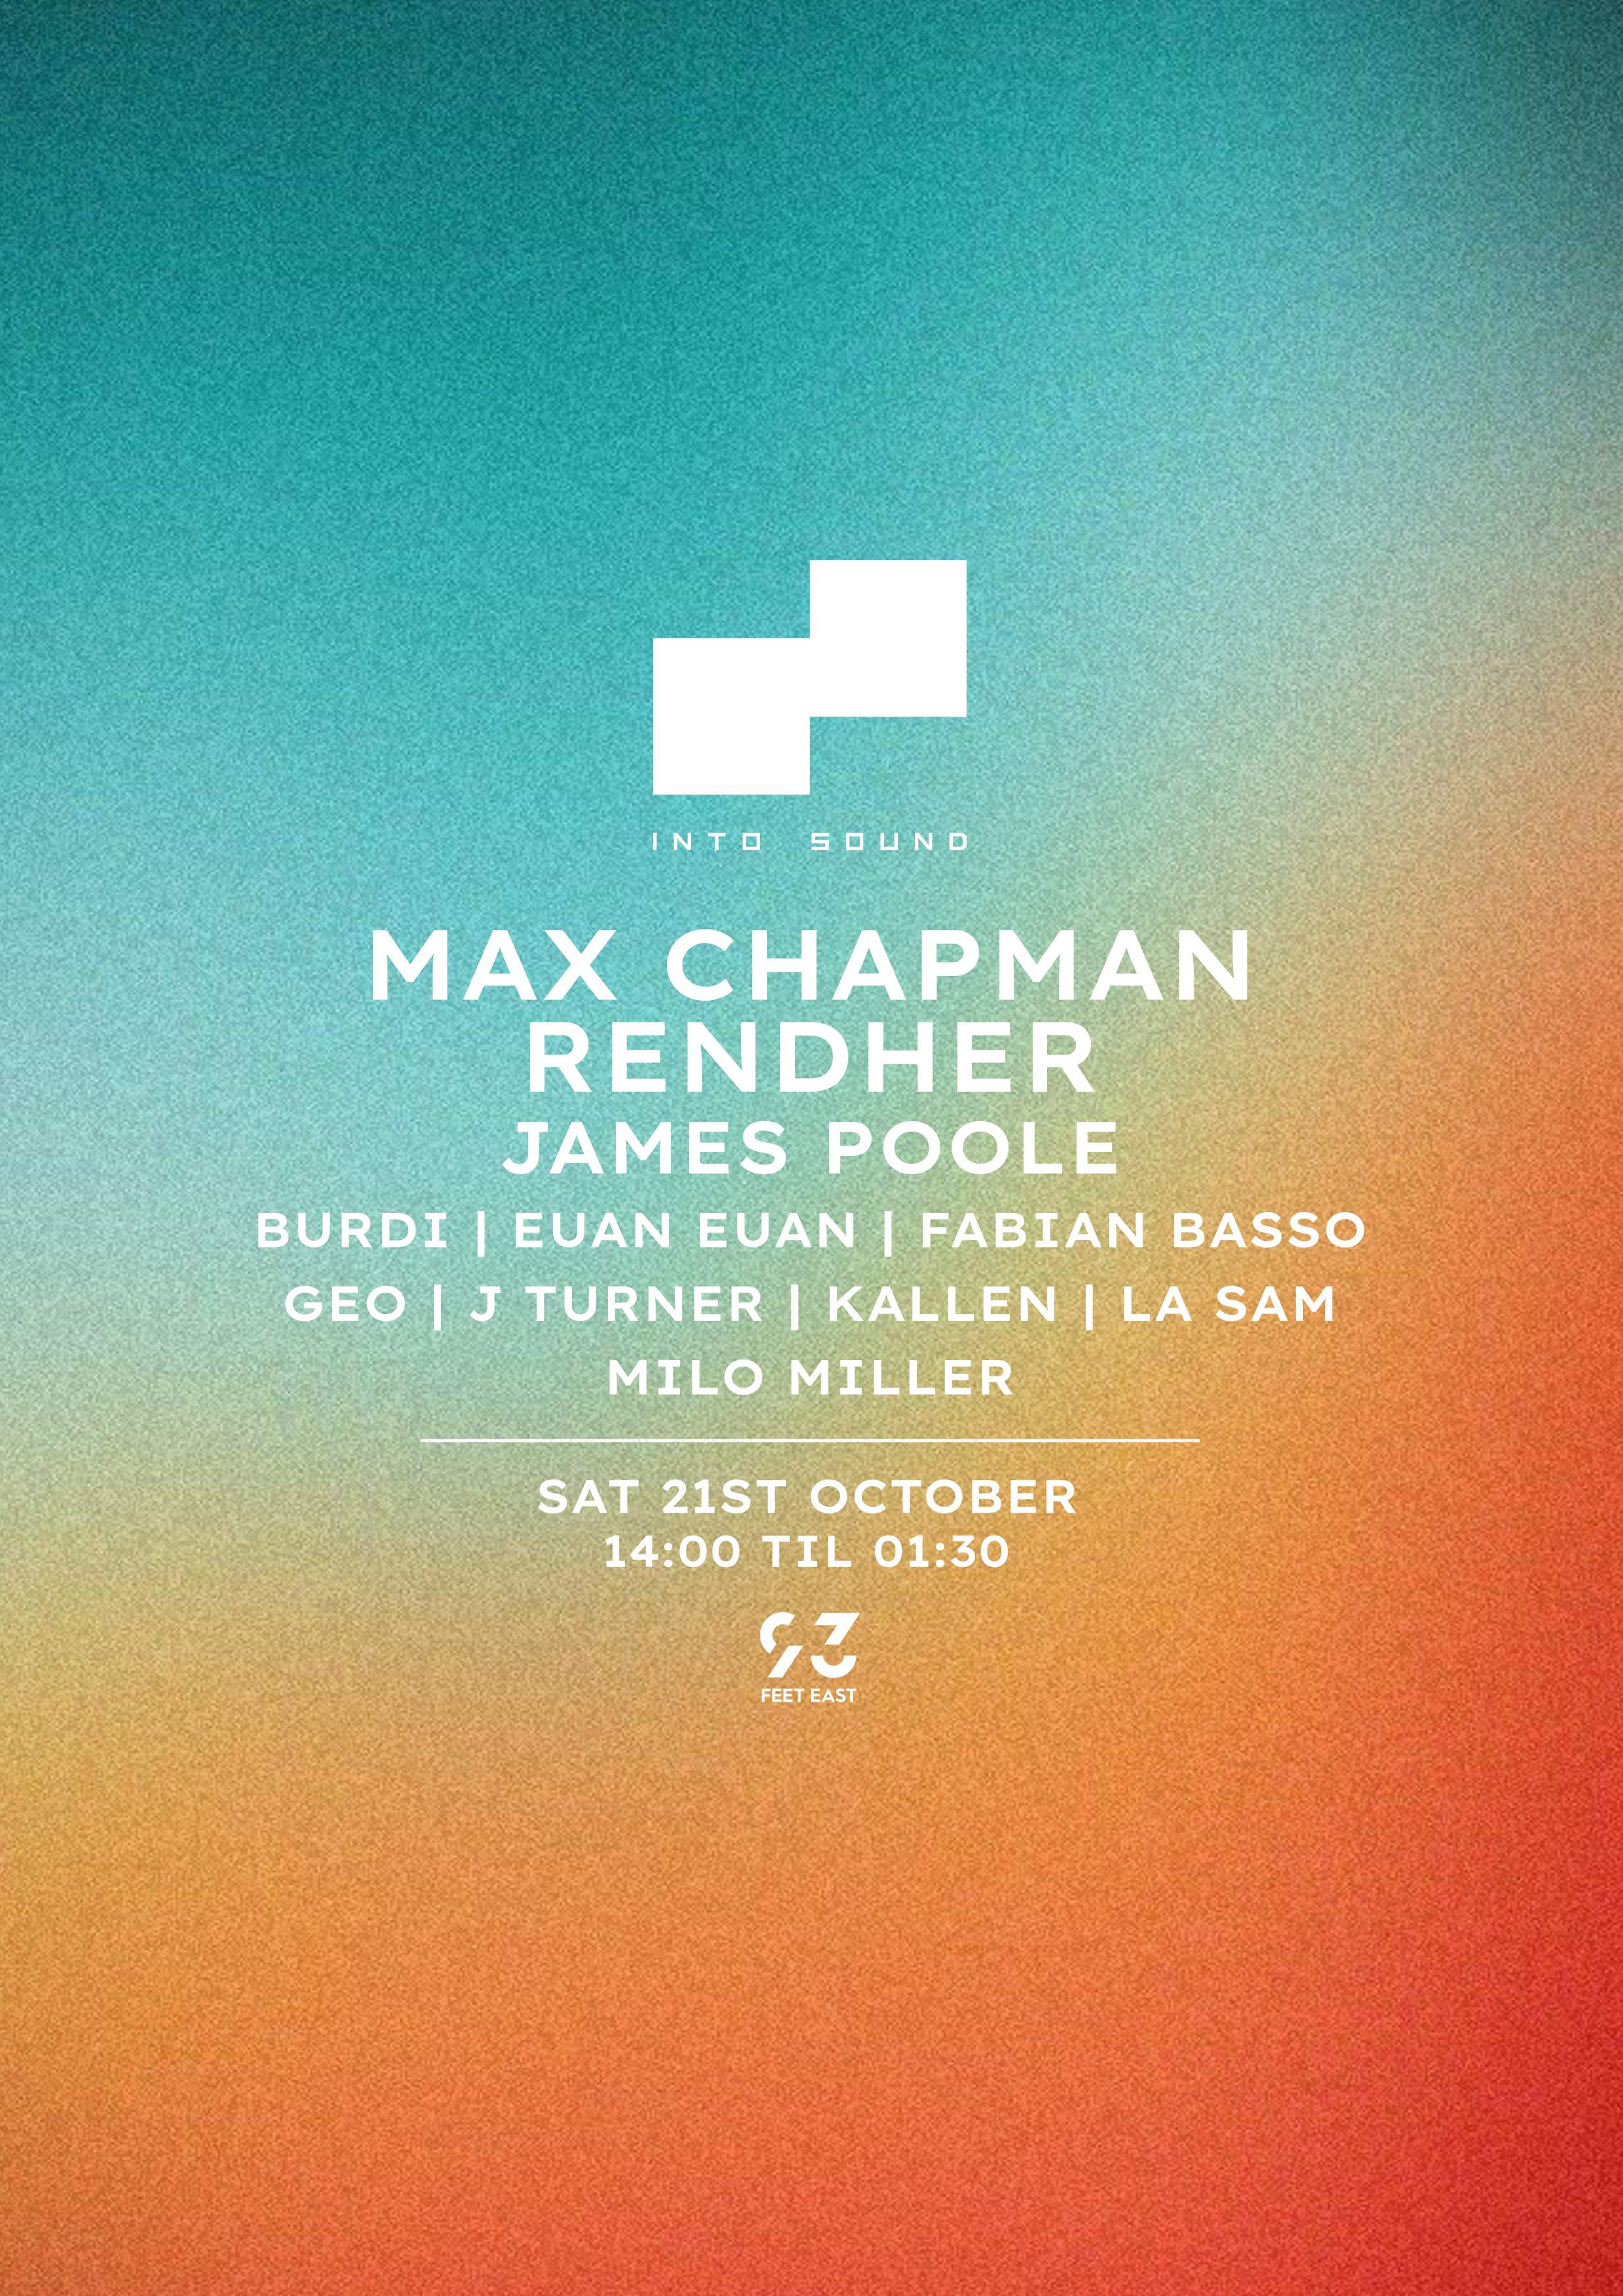 INTO SOUND // 93 FEET EAST [Max Chapman//RENDHER//JAMES POOLE] - フライヤー表